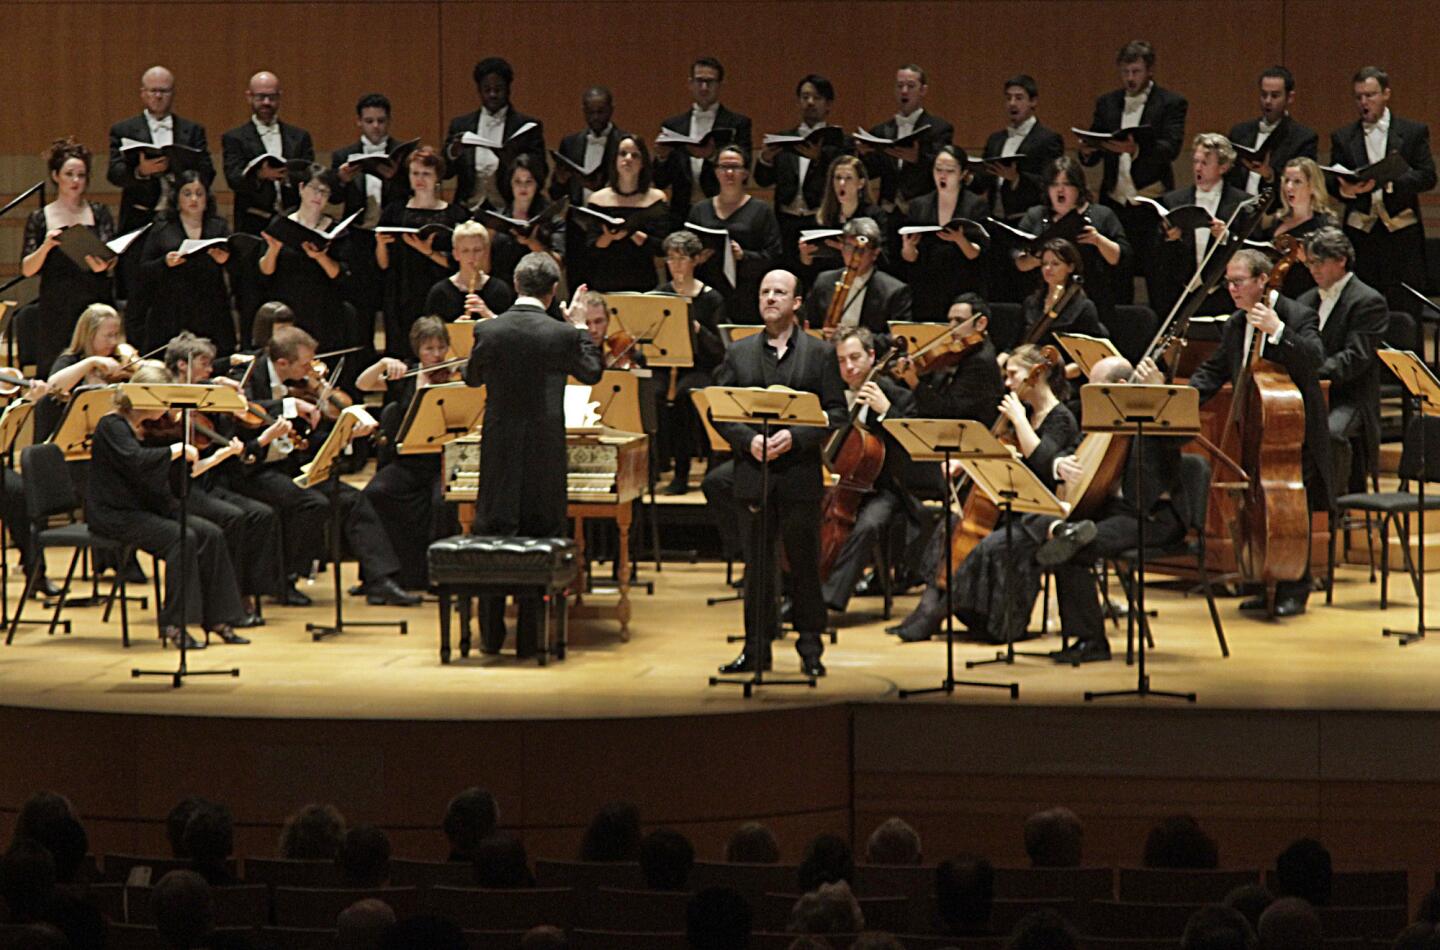 The composer's late oratorio "Theodora" is a four-hour contemplation of spiritual constancy amid global chaos. A considered, probing performance by the English Consort conducted by Harry Bicket at Segerstrom Hall stayed a course few world leaders these days manage.